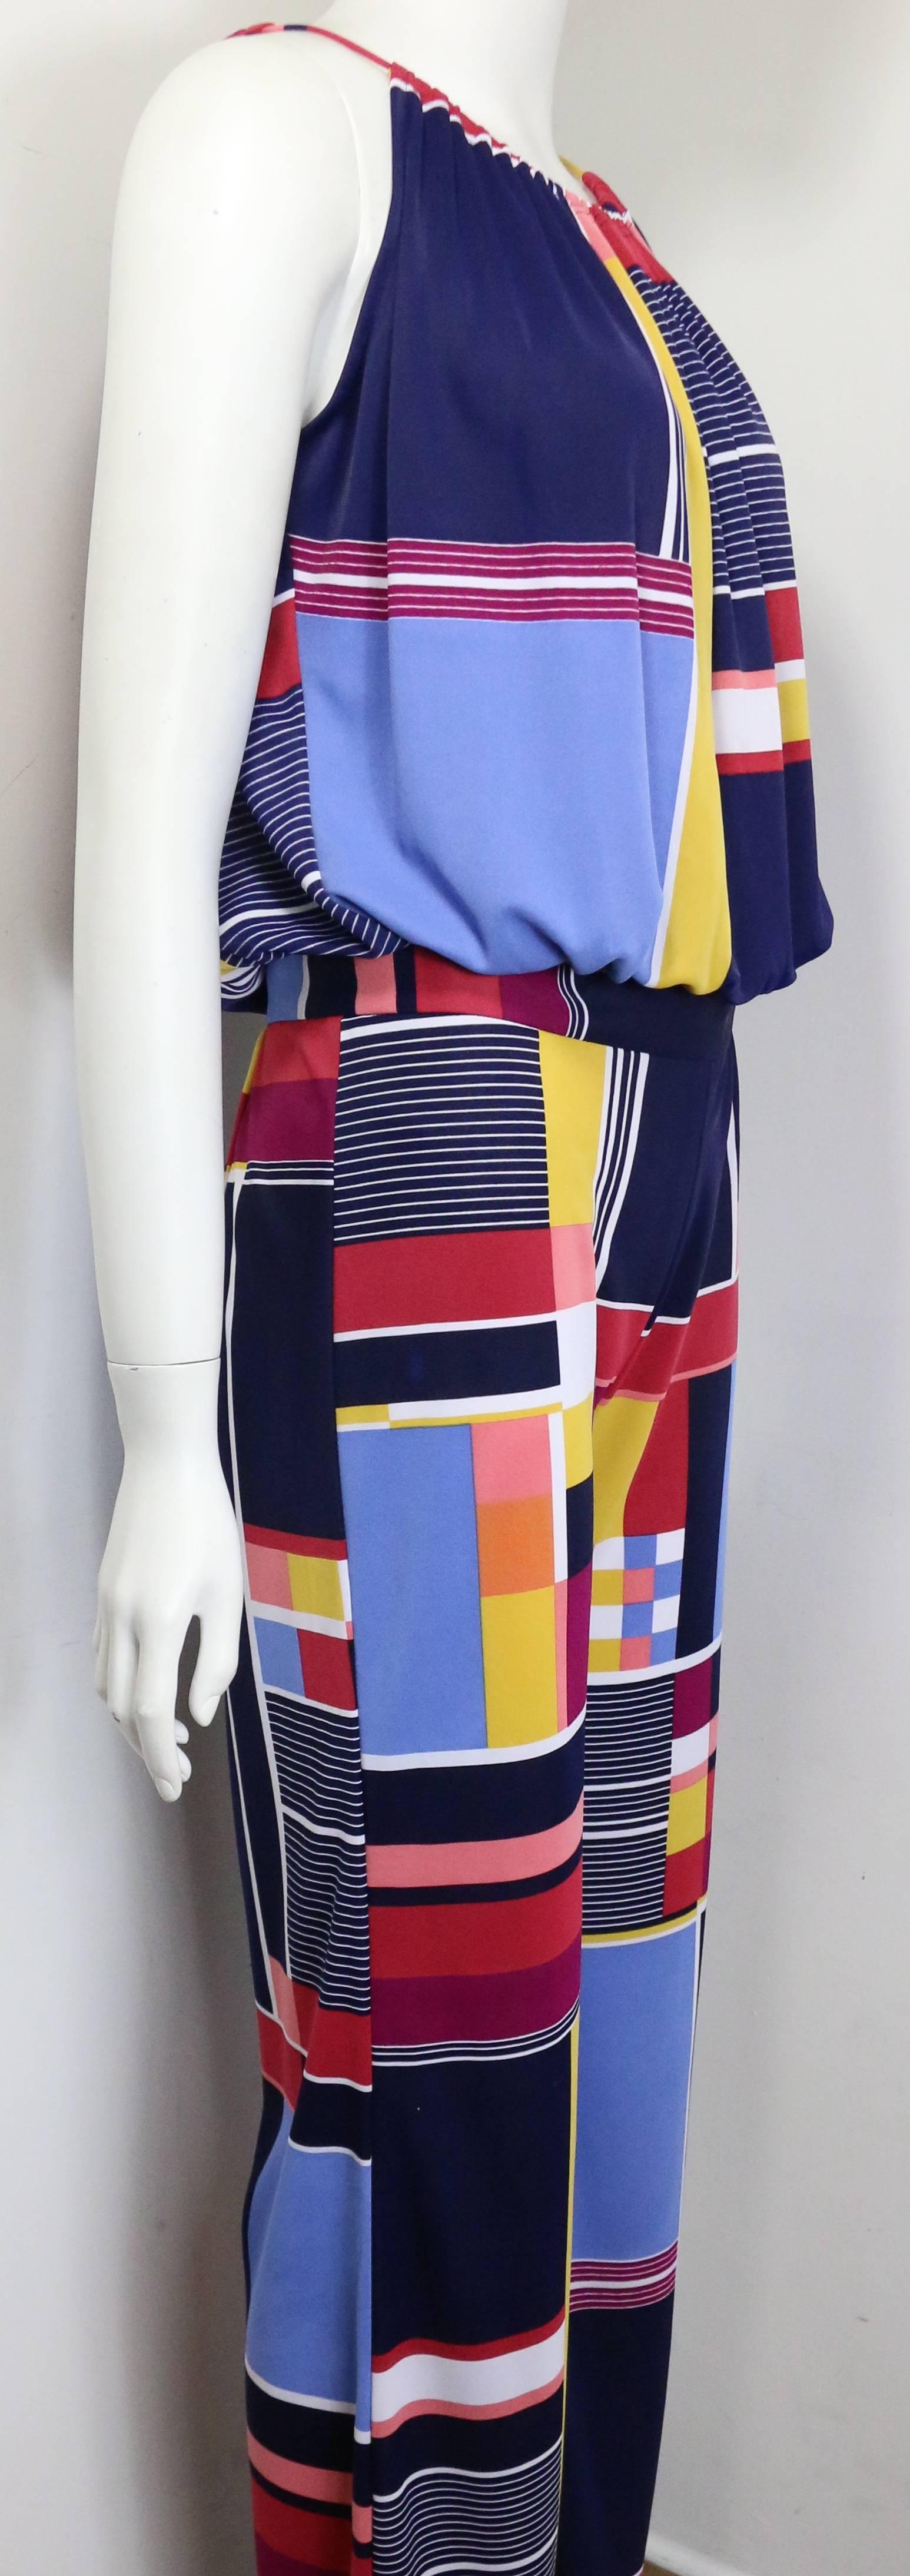 - Vintage 90s Clements Ribeiro multi colour retro patterns blouse and pants ensemble. Featuring a elastic hem and spaghetti straps round neck pullover blouse, a button and zipper closure wild legs cutting pants. This ensemble is so 70s! Style the